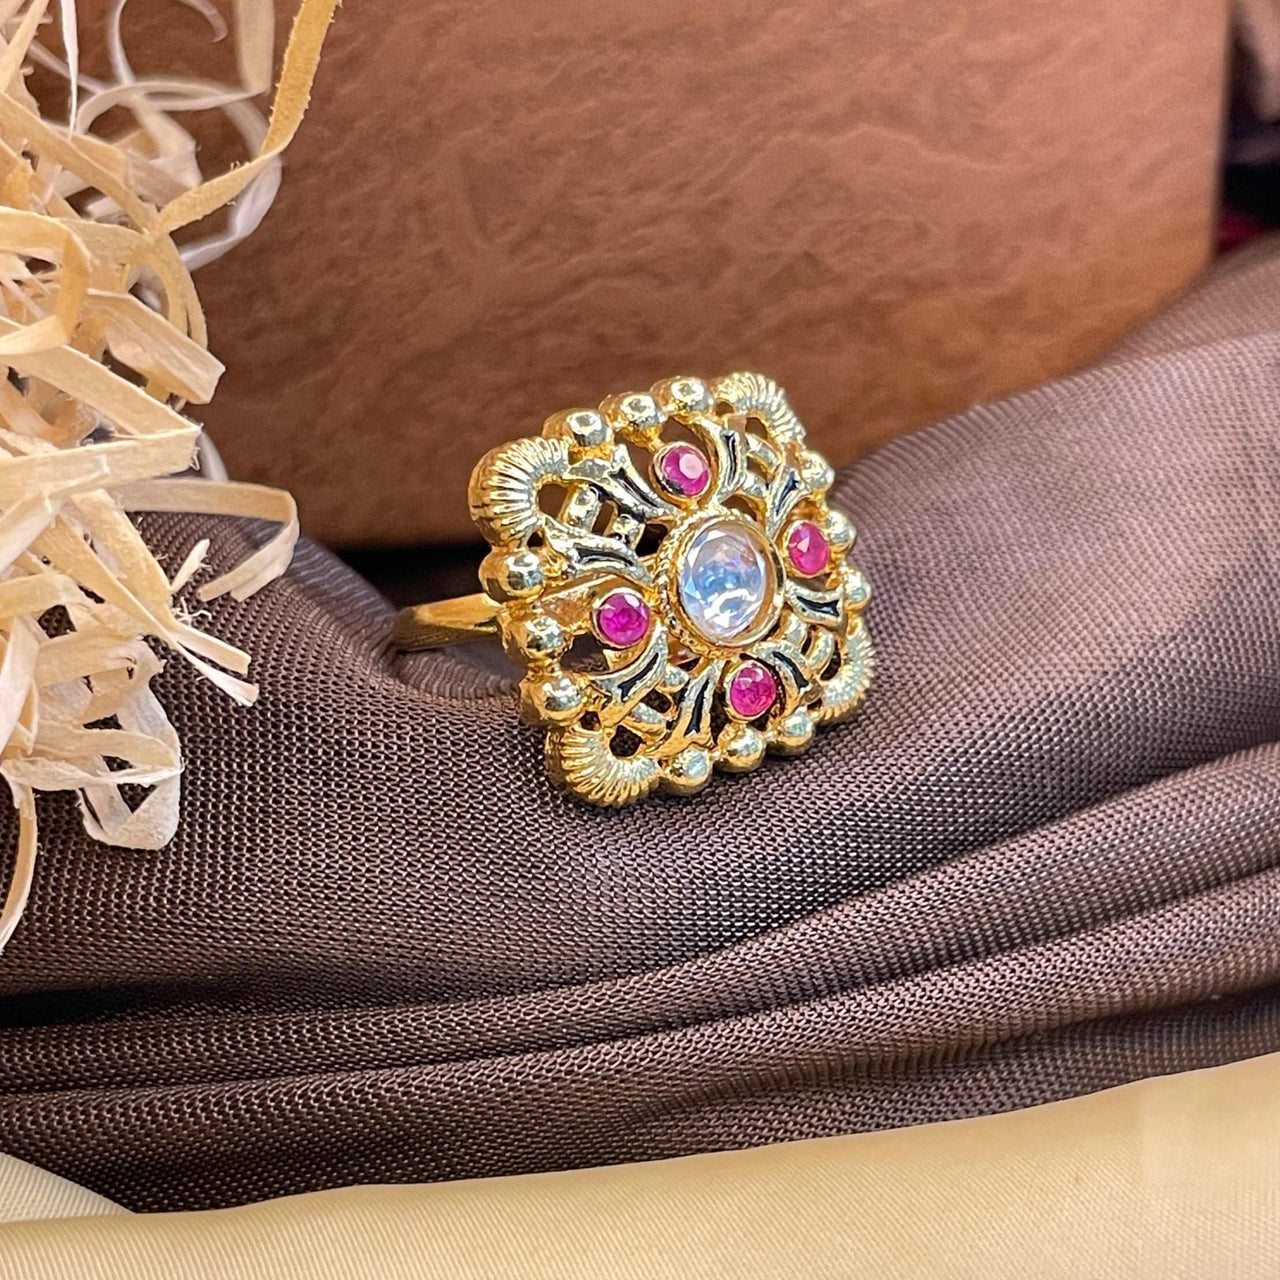 Gold Rings Designs For Women @ Aggarwal Jewellers Ratia | Latest gold ring  designs, Gold rings fashion, Gold ring designs